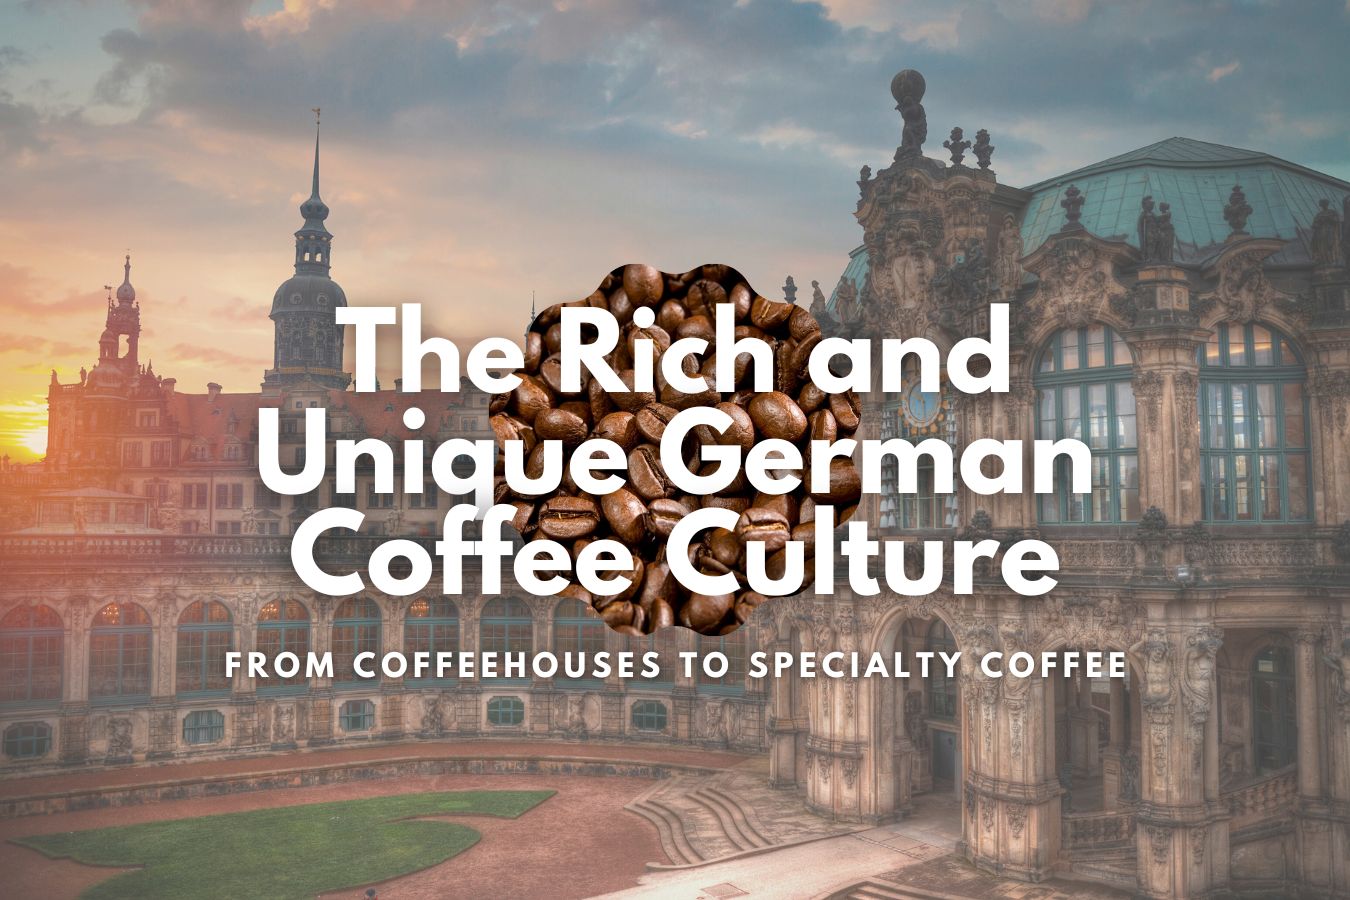 The Rich and Unique German Coffee Culture From Coffeehouses to Specialty Coffee